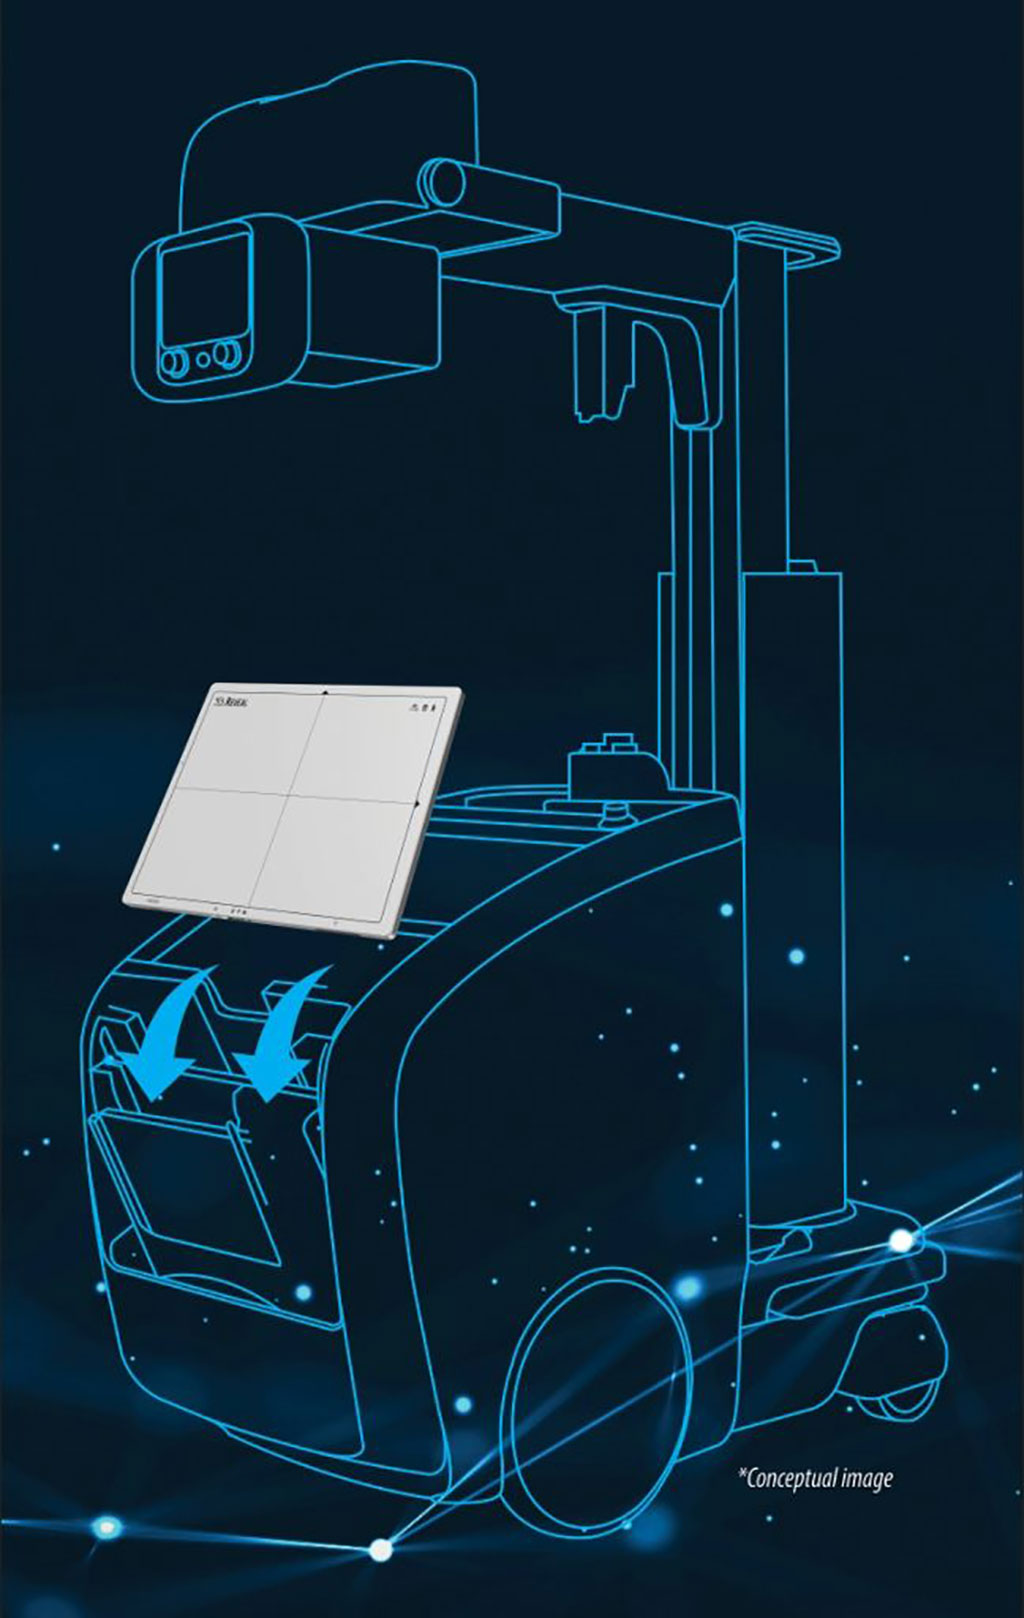 Image: Conceptual image of the world’s first dual-energy mobile X-ray system (Photo courtesy of KA Imaging)